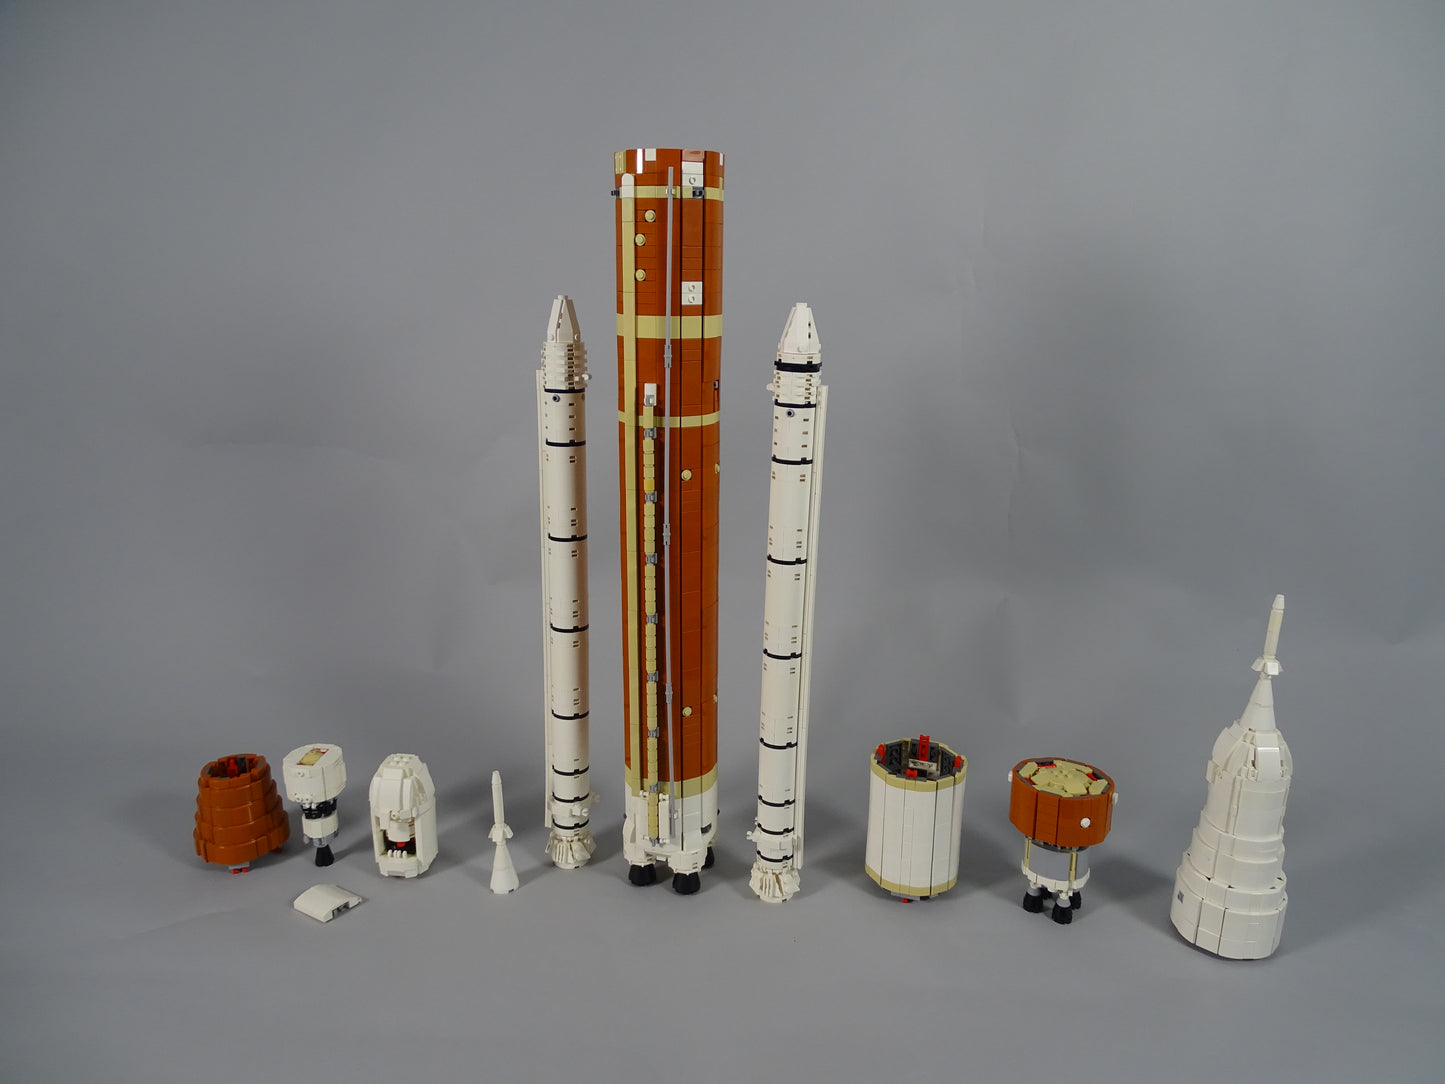 NASA Space Launch System Family (SLS)